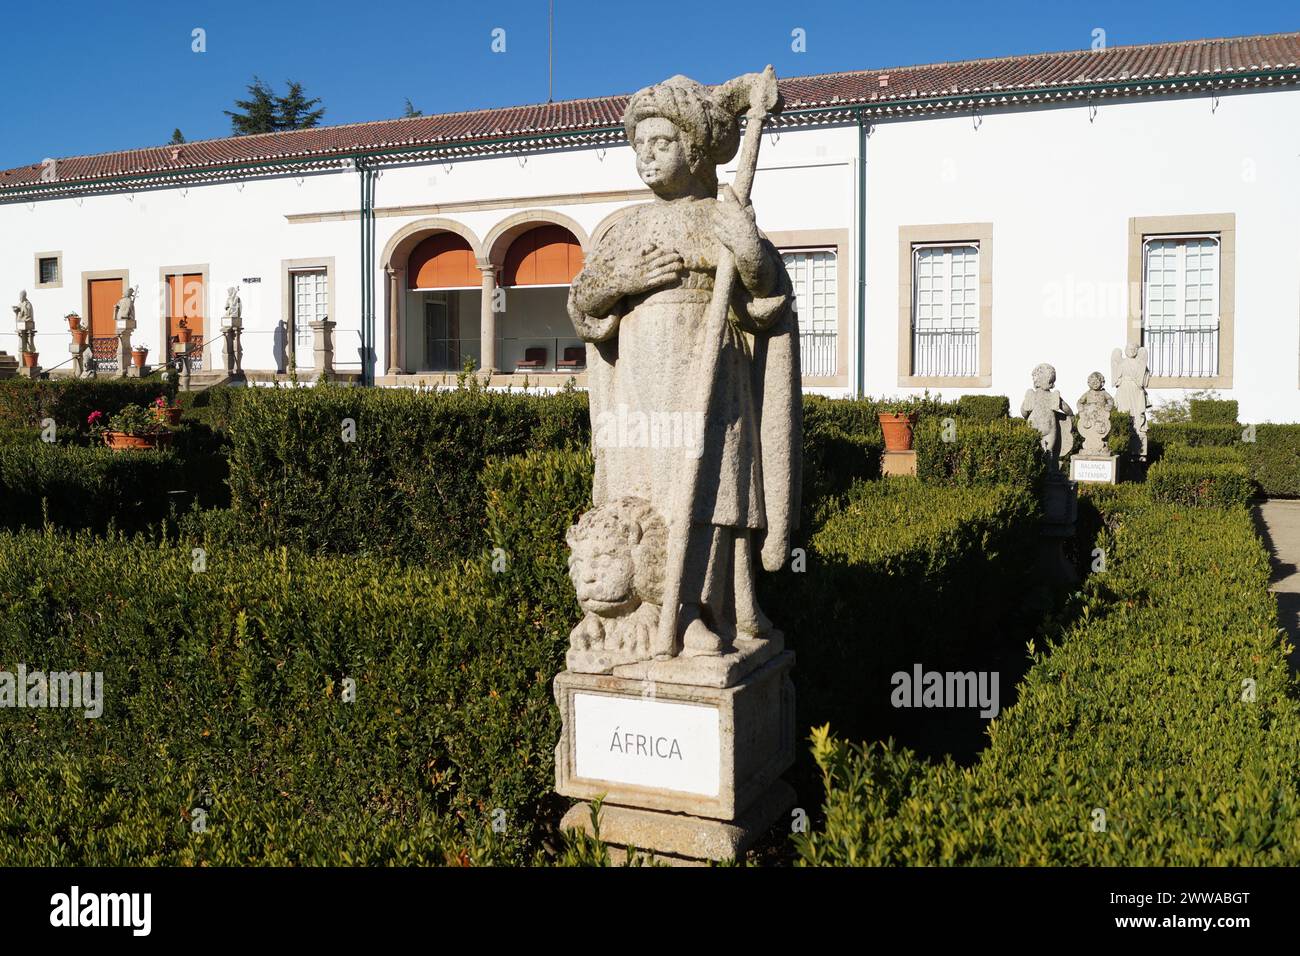 Africa, allegoric sculptures in the Garden of the Episcopal Palace, Baroque manicured garden with sculptures and fountains, Castelo Branco, Portugal Stock Photo